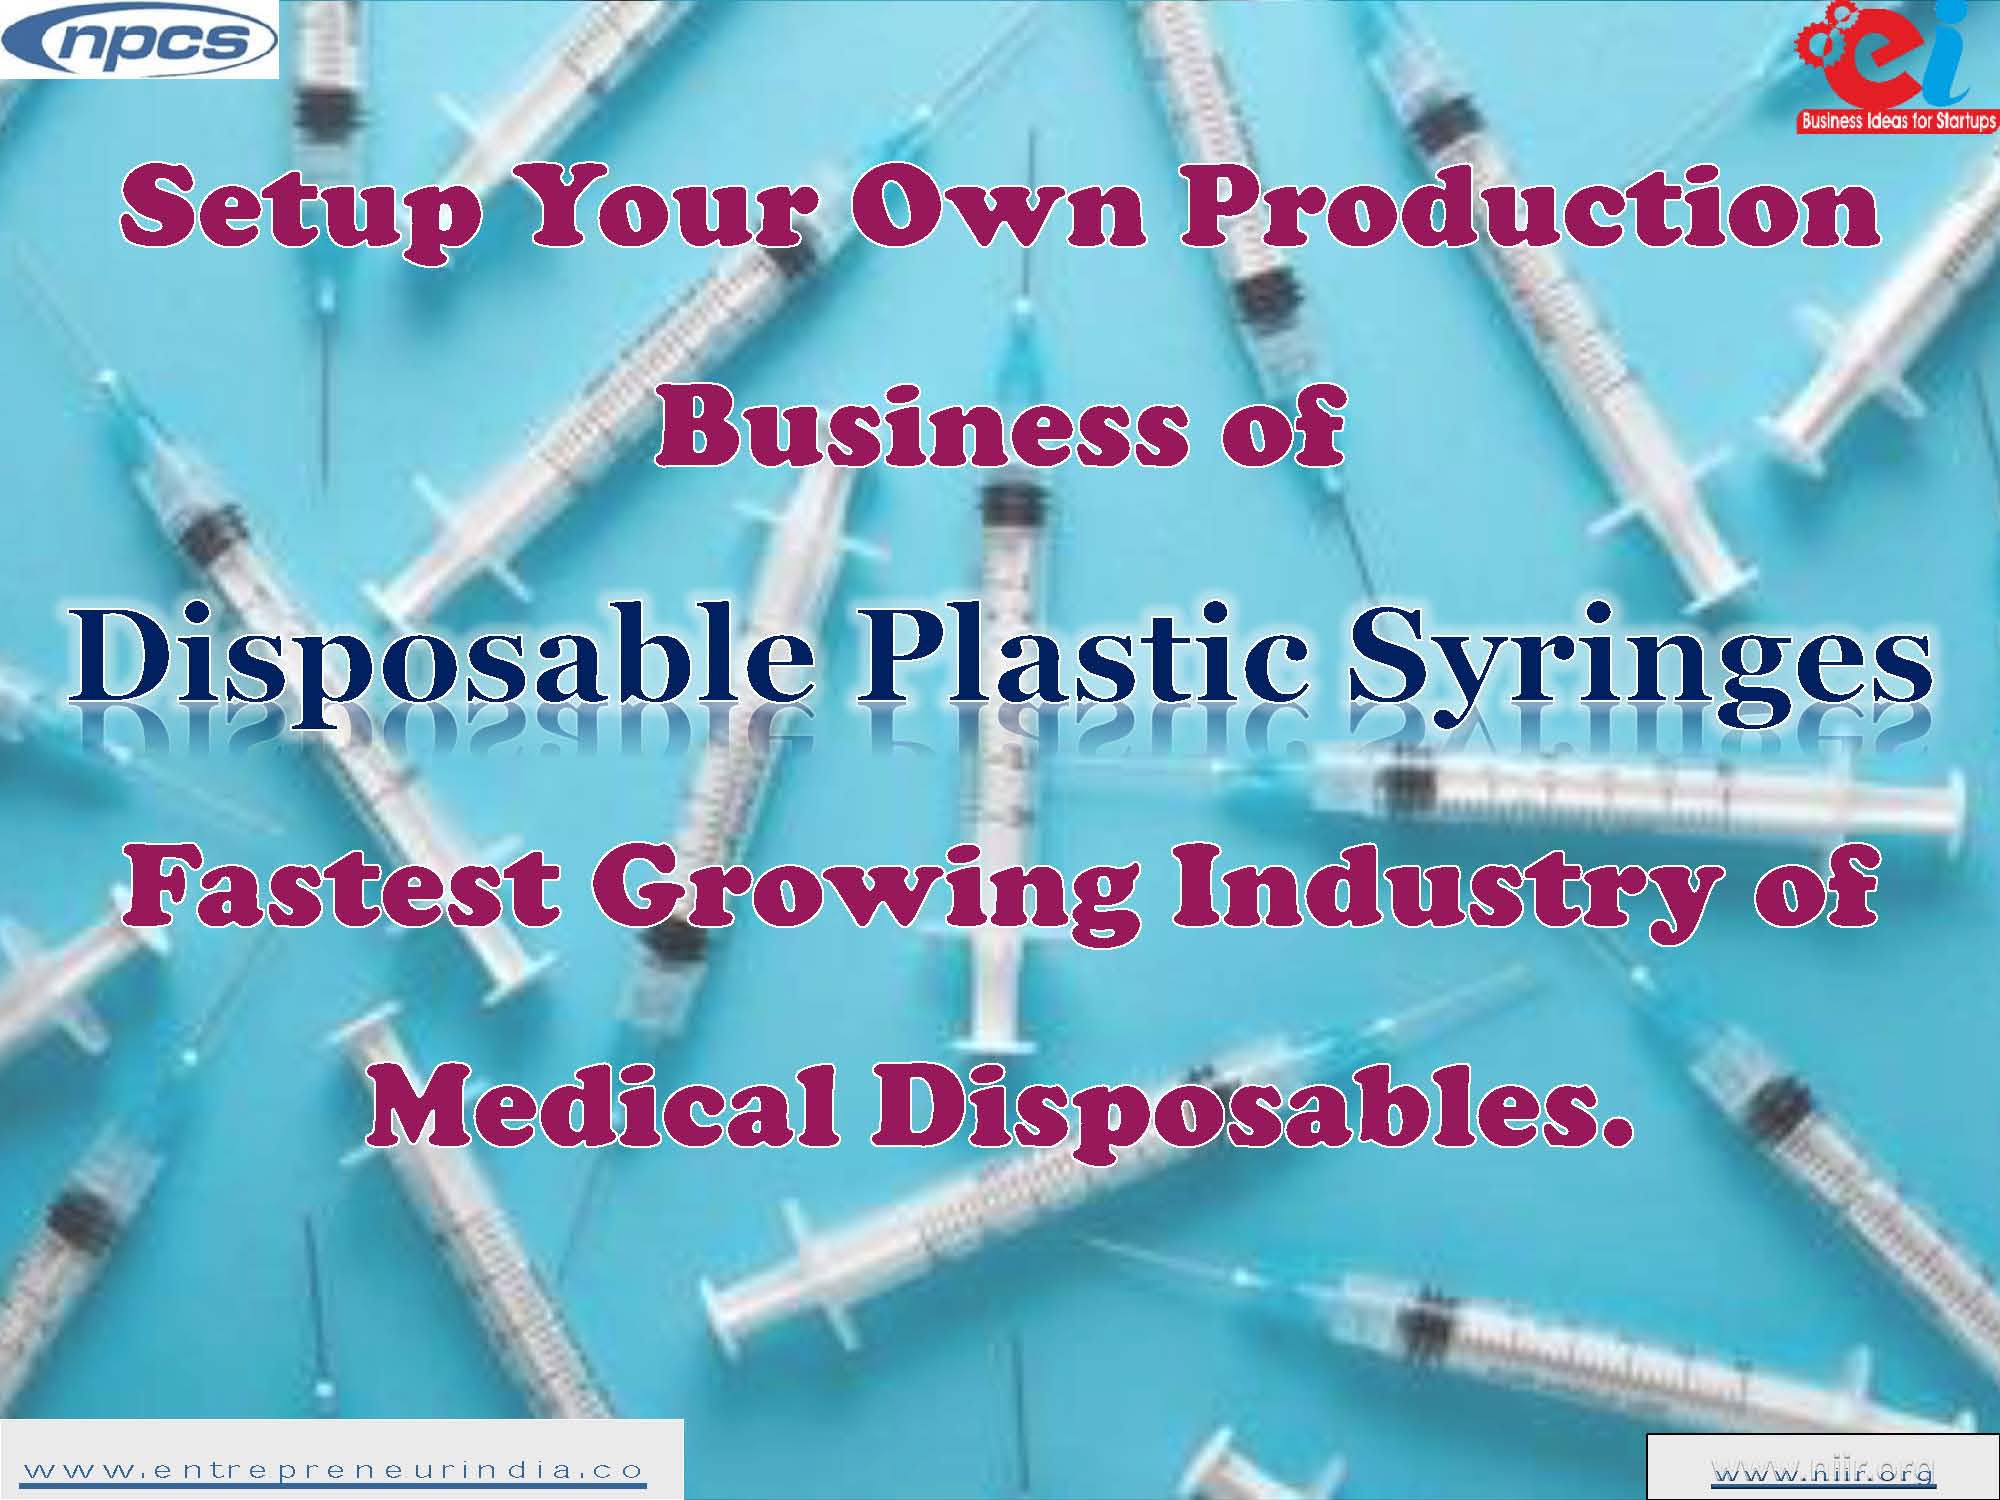 Setup Your Own Production Business of Disposable Plastic Syringes Fastest Growing Industry of Medical Disposables